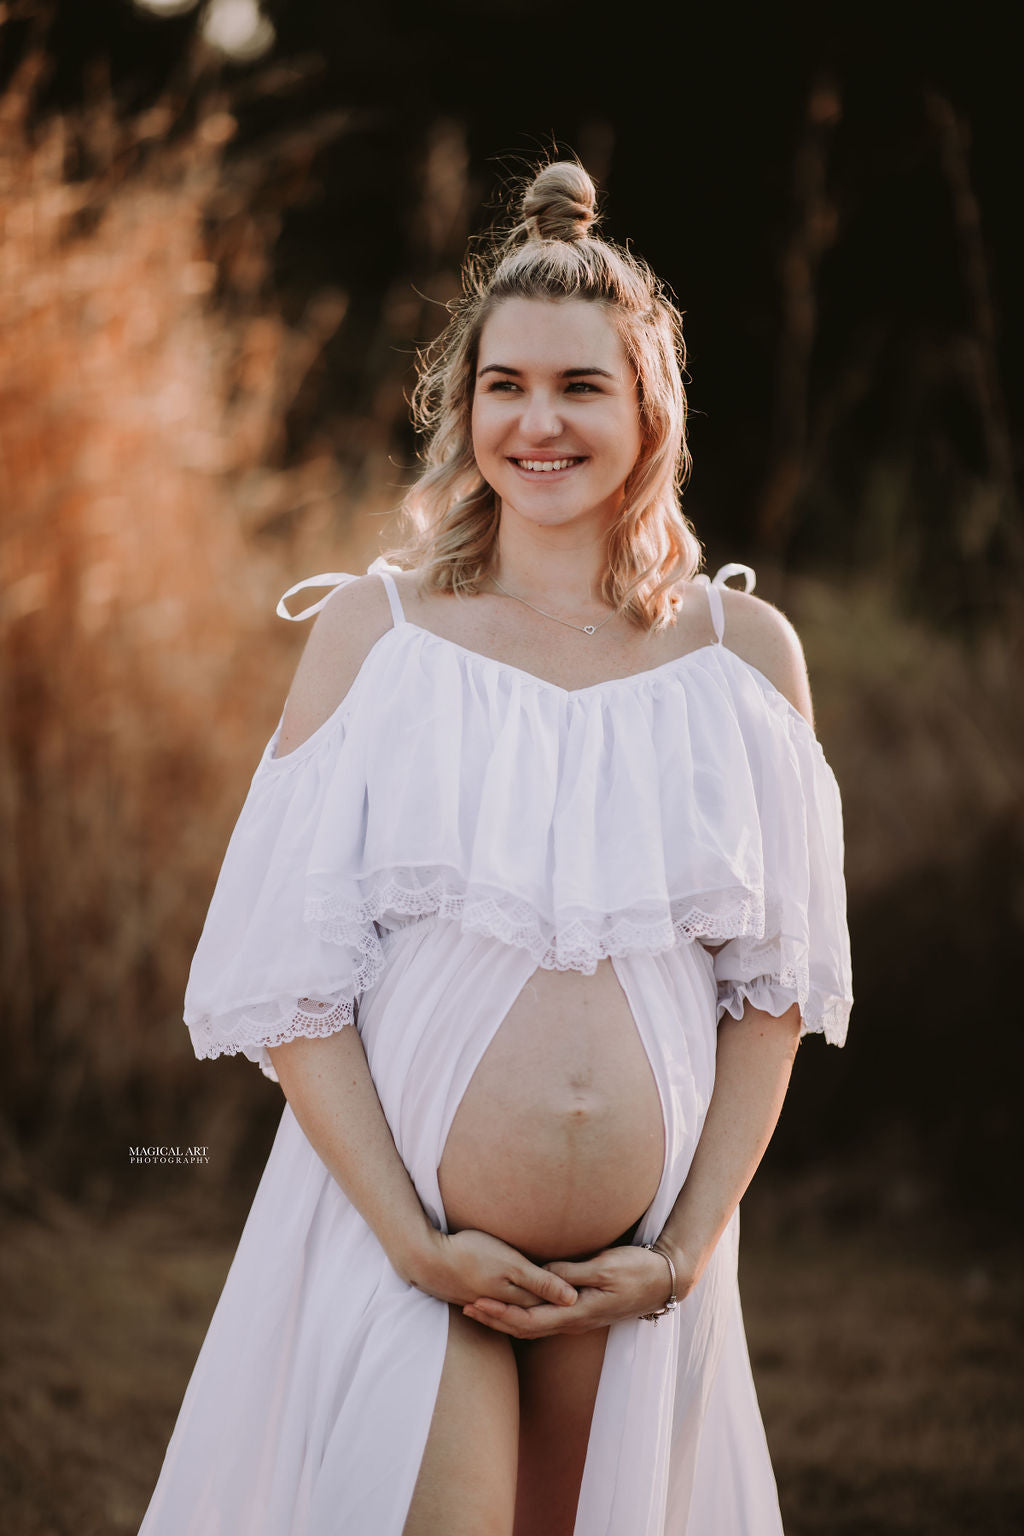 Maternity Photoshoot Dresses Hire - Grace - White Gown - 4 DAY RENTAL